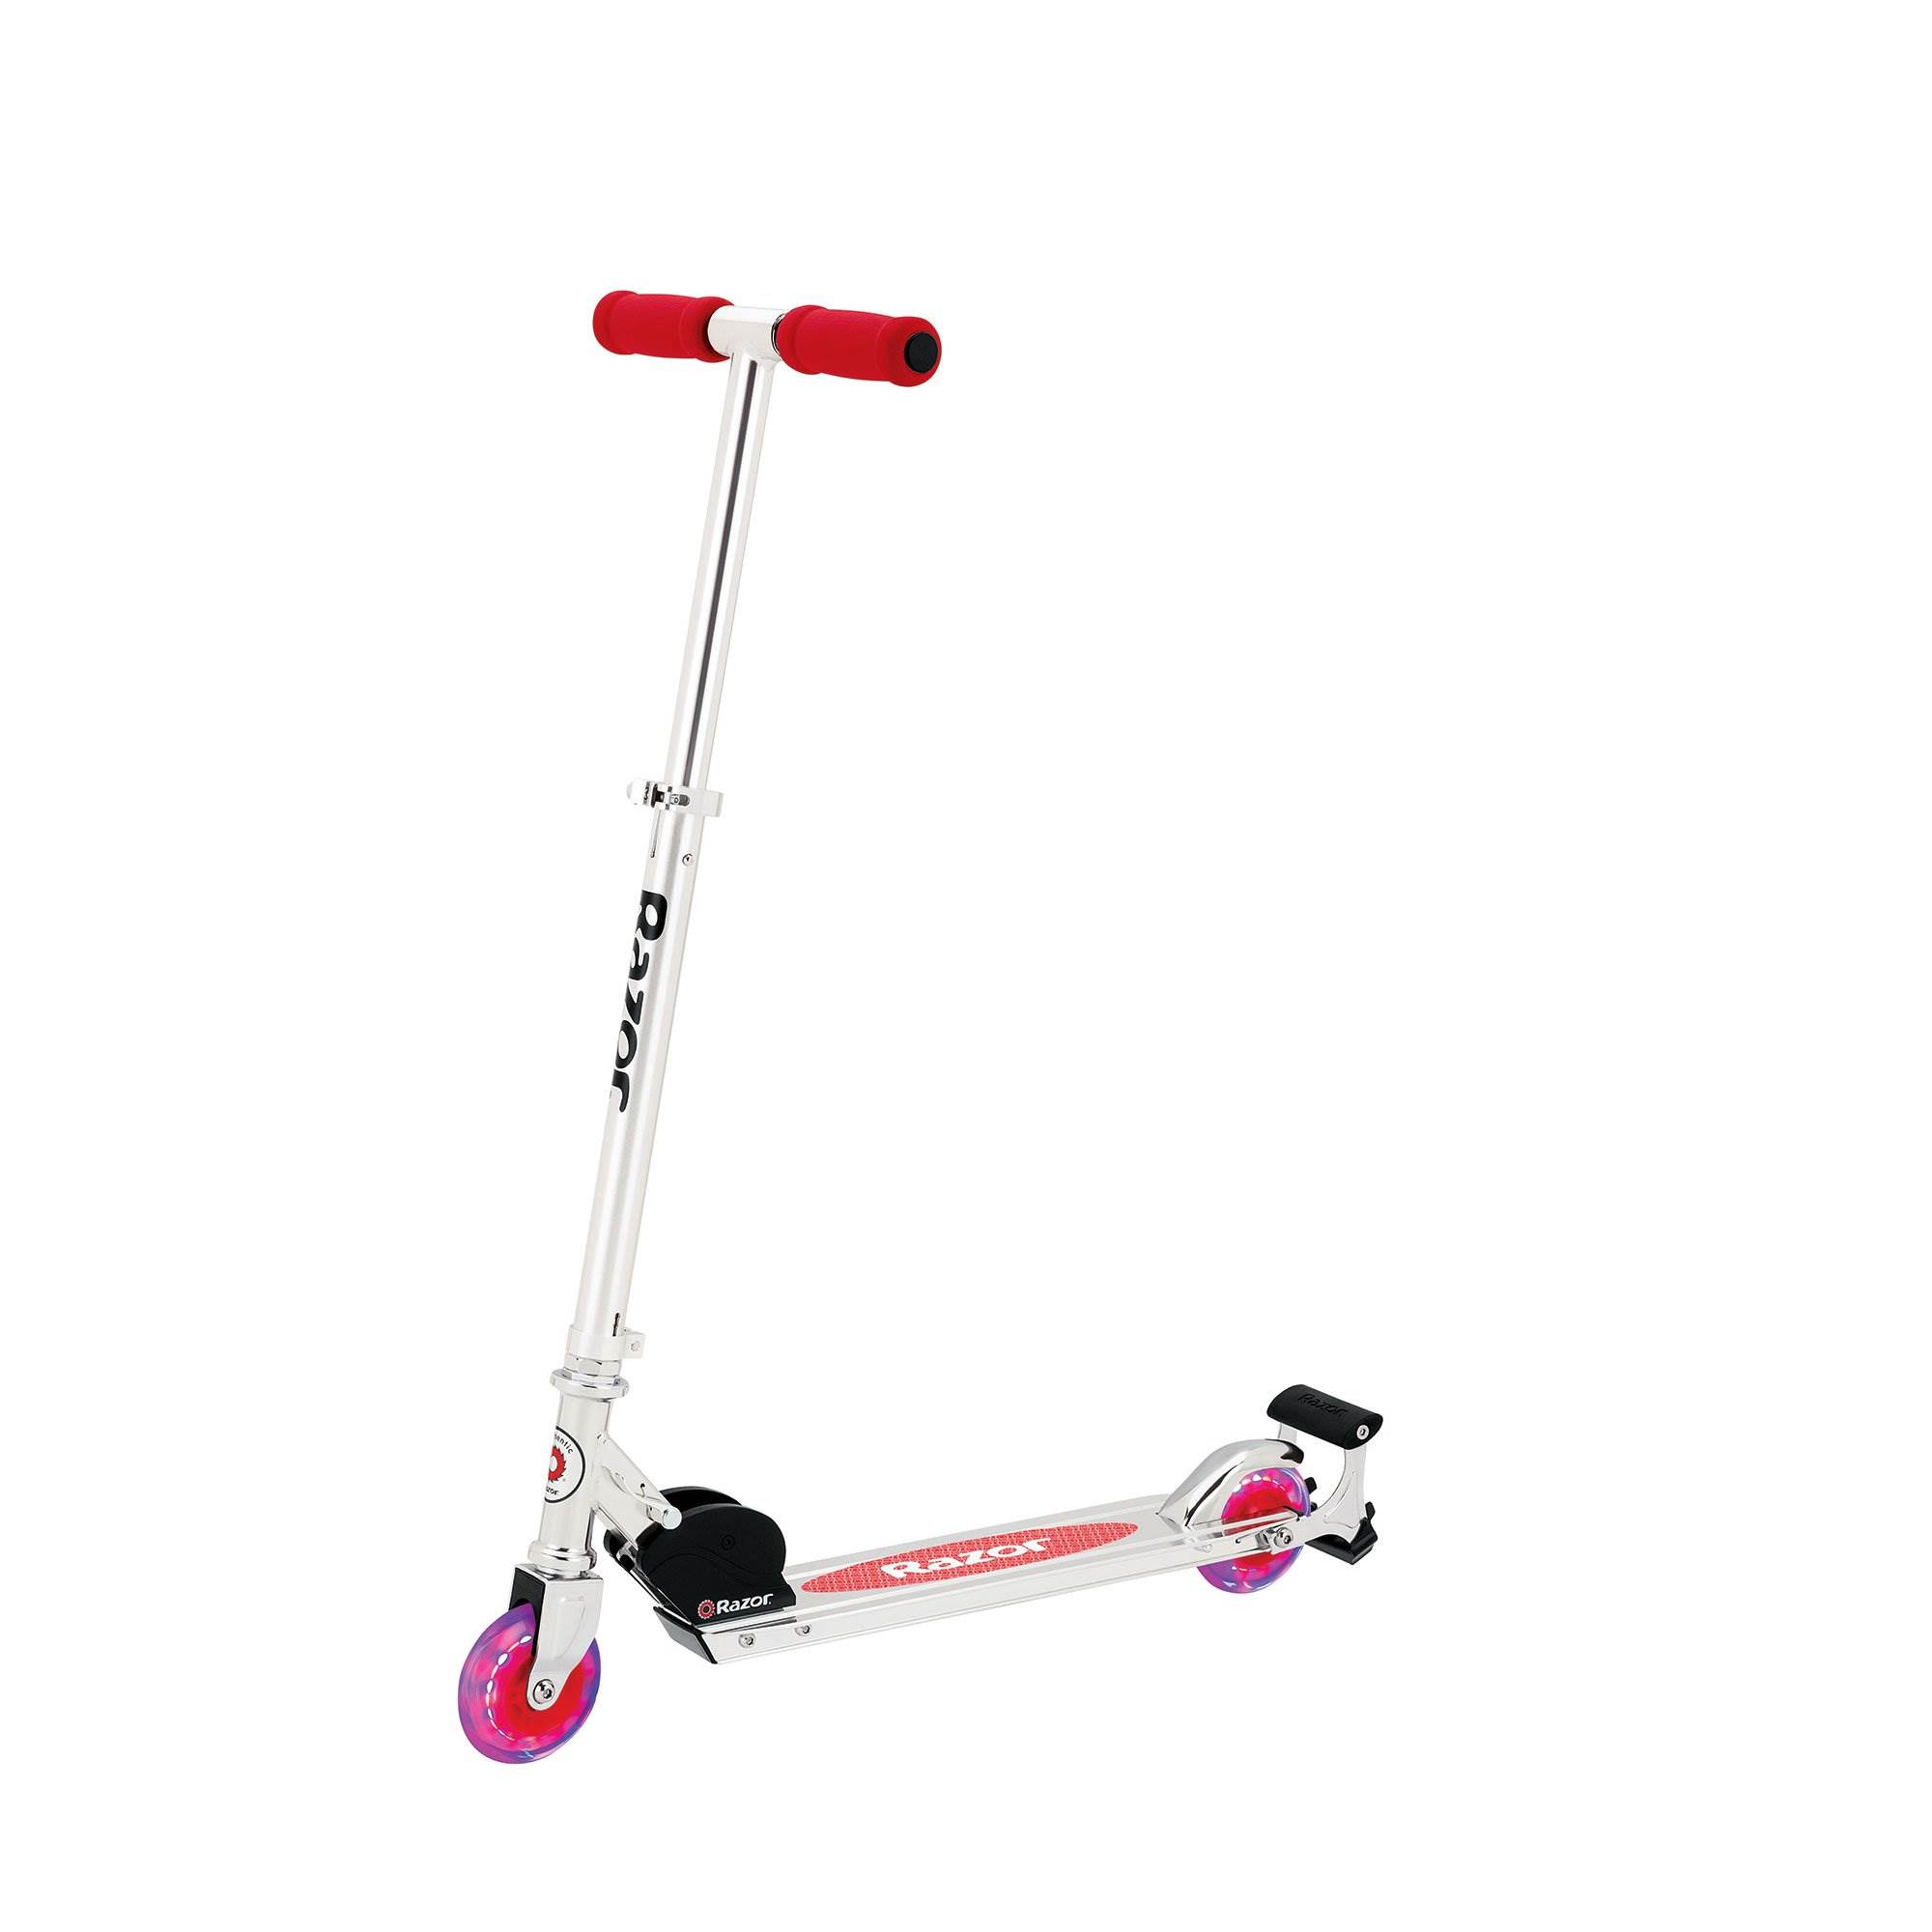 Razor Spark + Kids Folding Kick Scooter with Light Up Wheels and Spark Bar, Red - image 1 of 2